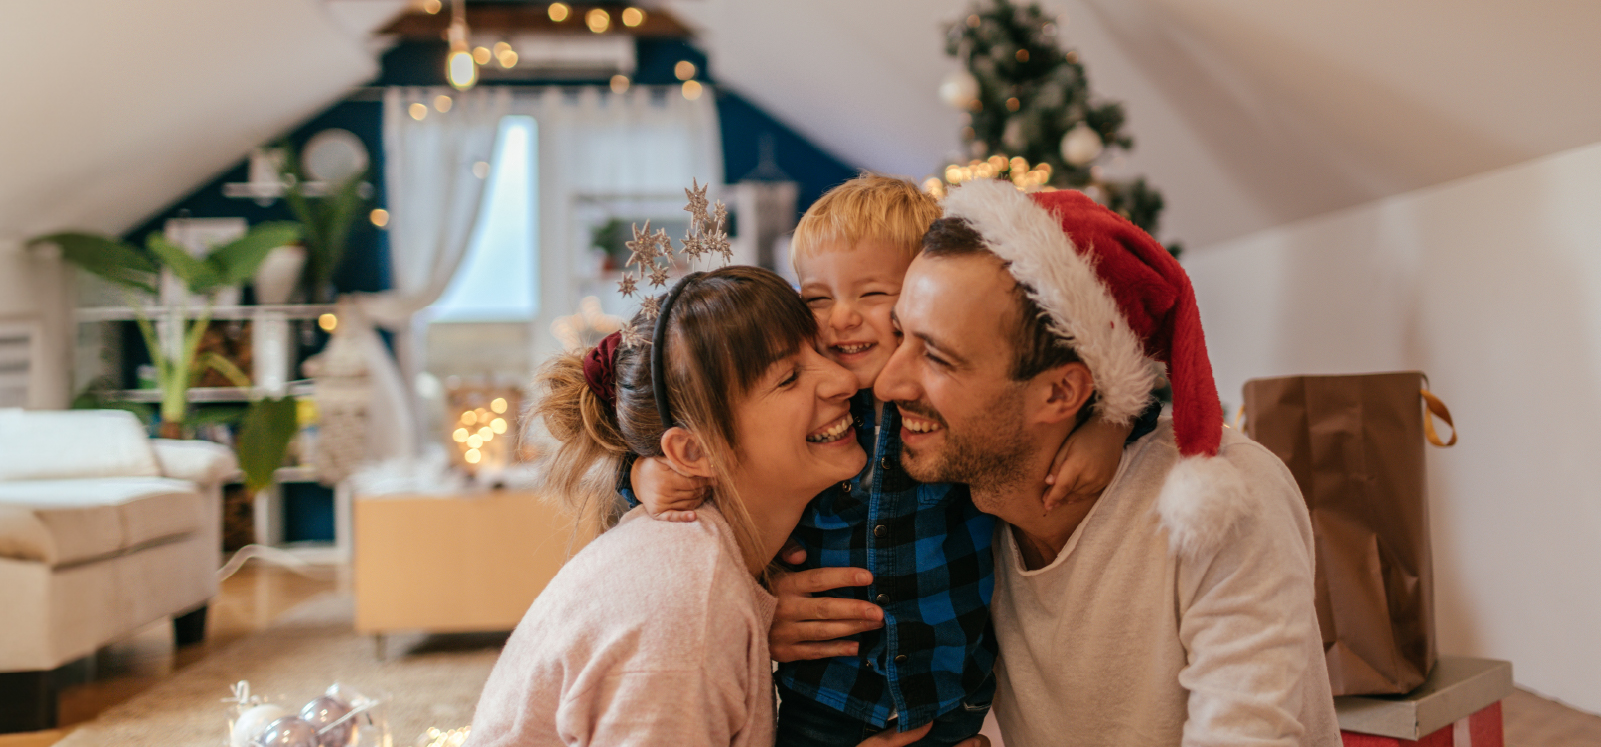 IMAGE: Family hugging in living room decorated for the holidays